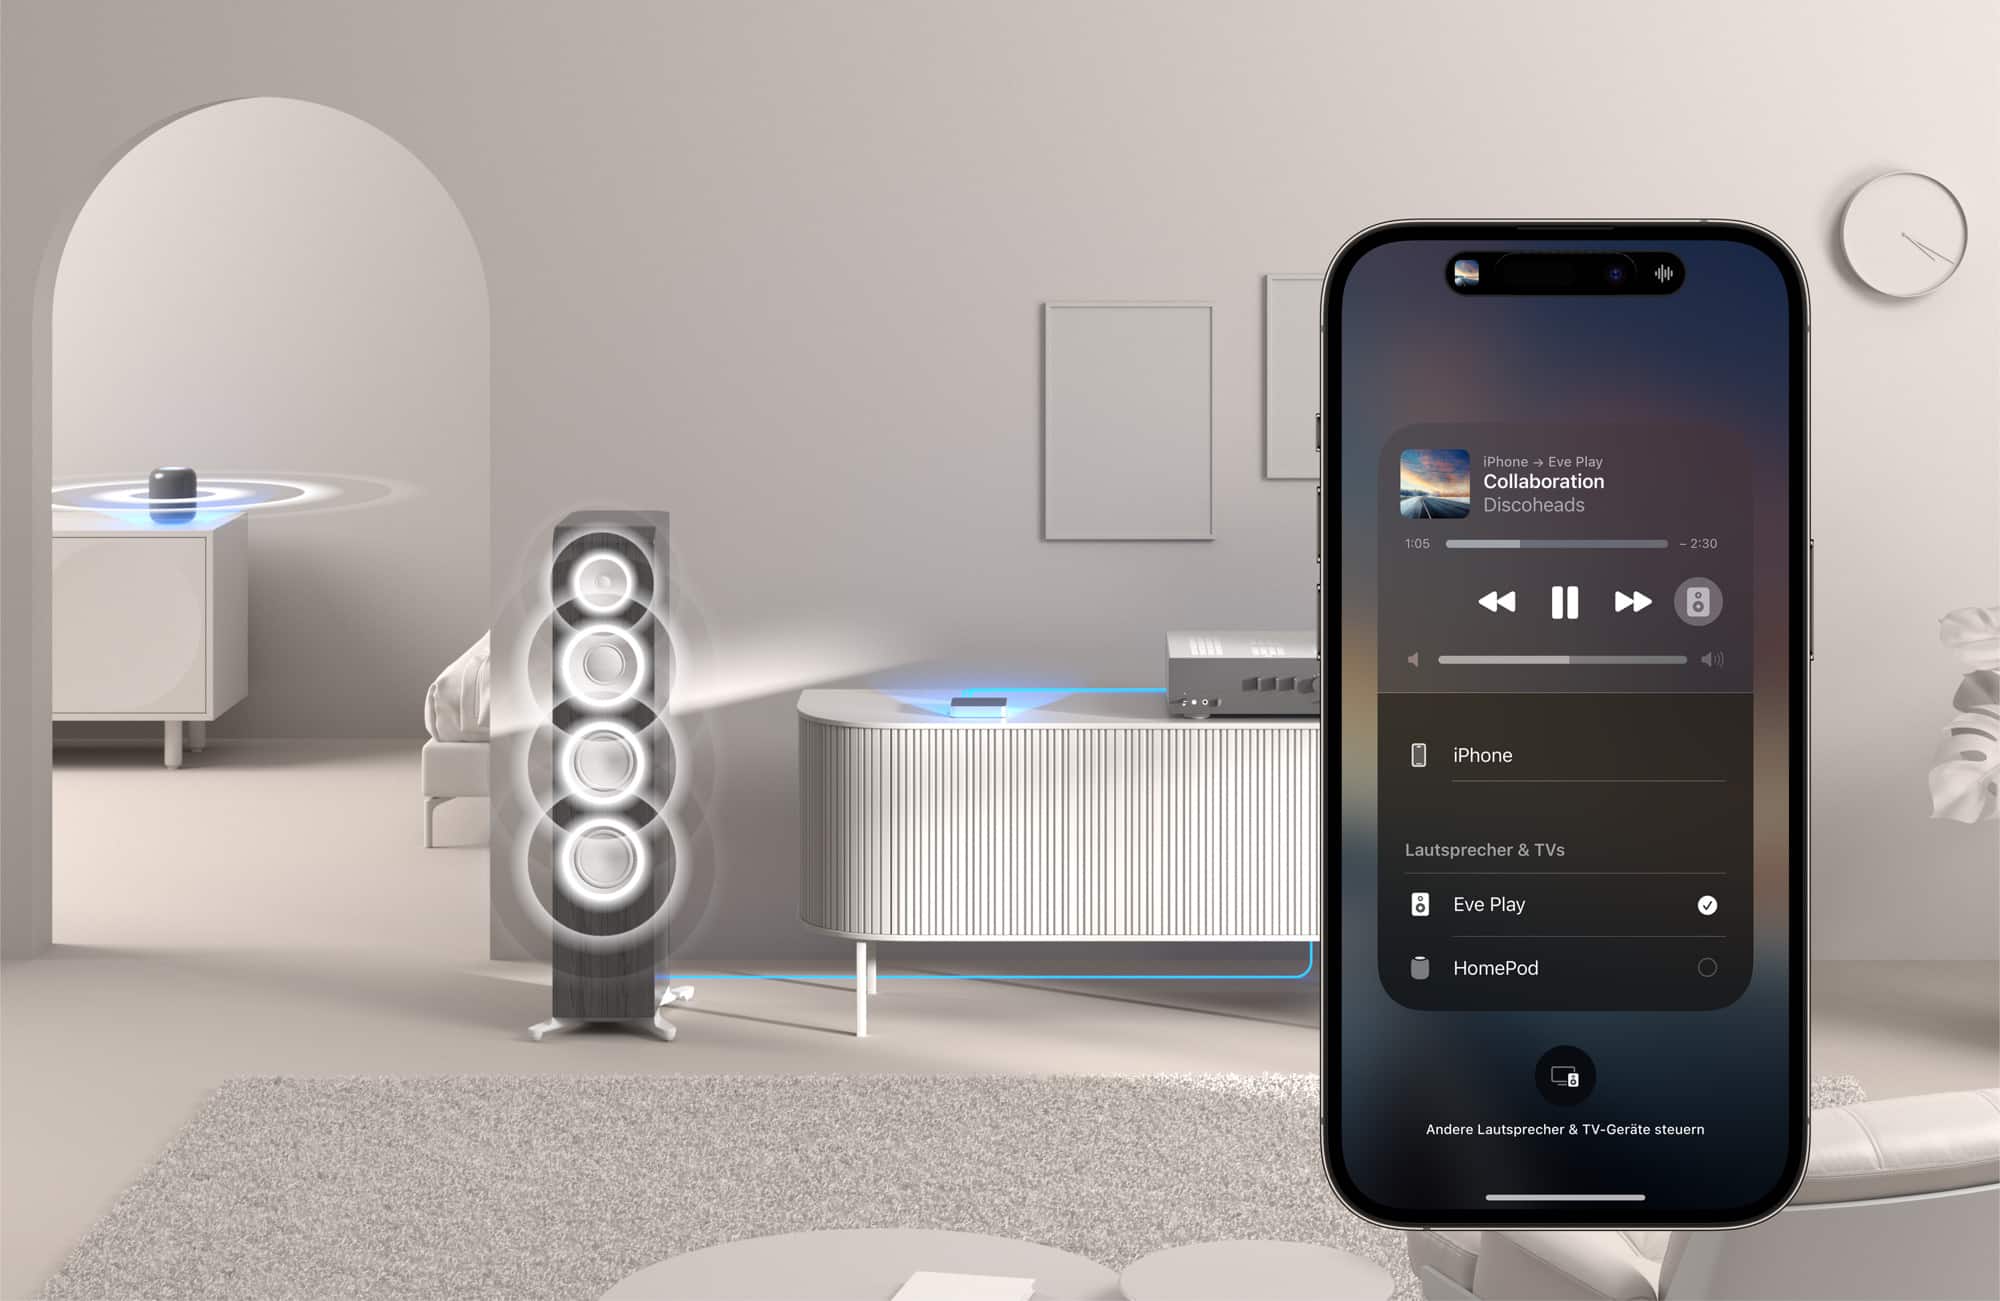 Eve Play ist offiziell: Neuer Audio-Adapter mit AirPlay 2